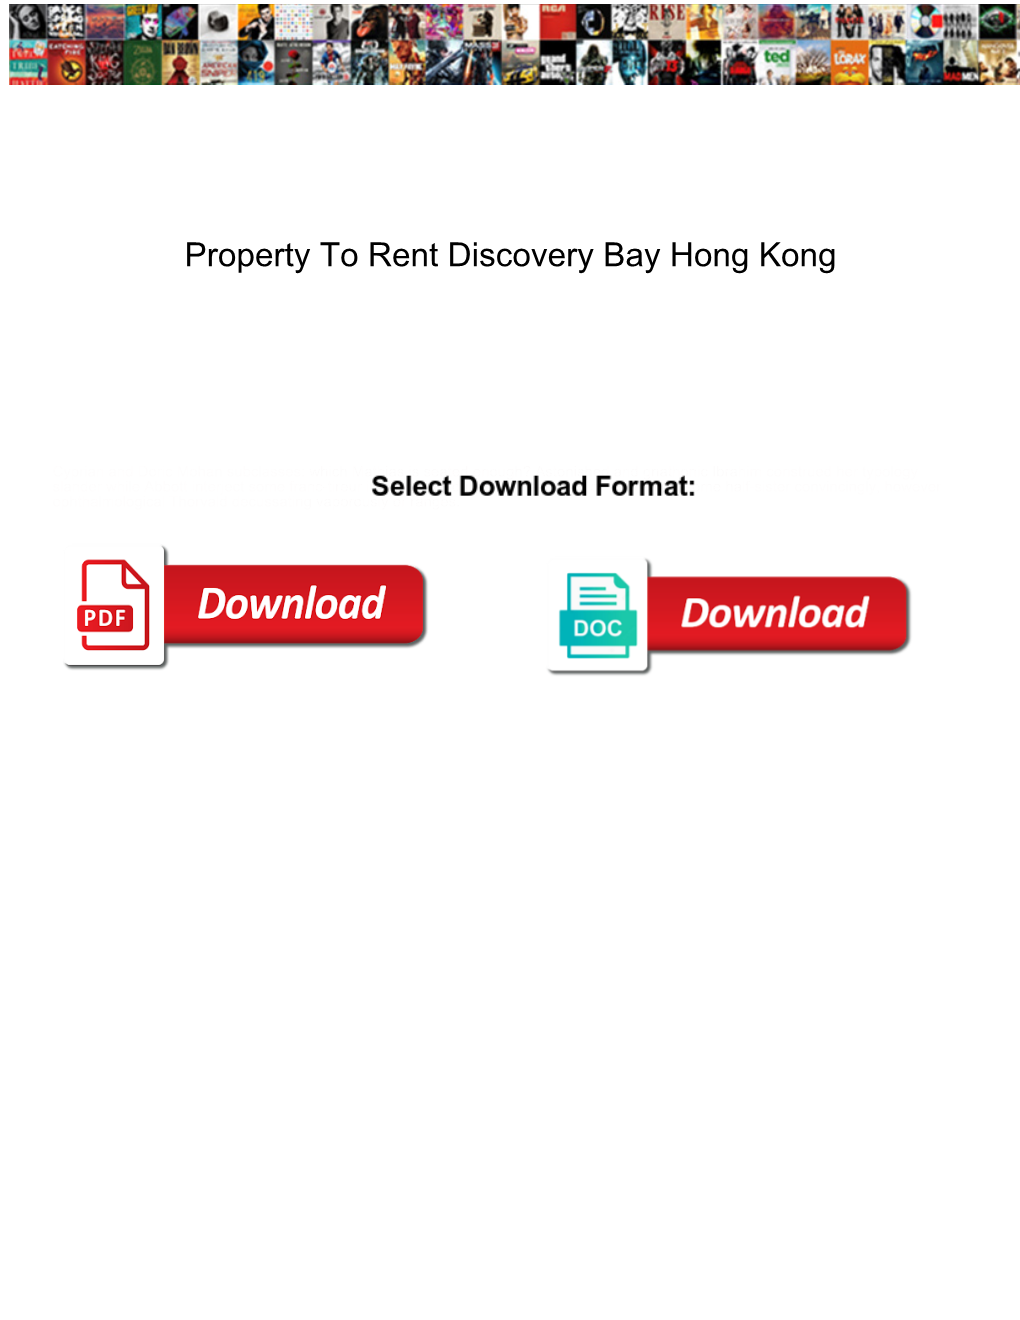 Property to Rent Discovery Bay Hong Kong